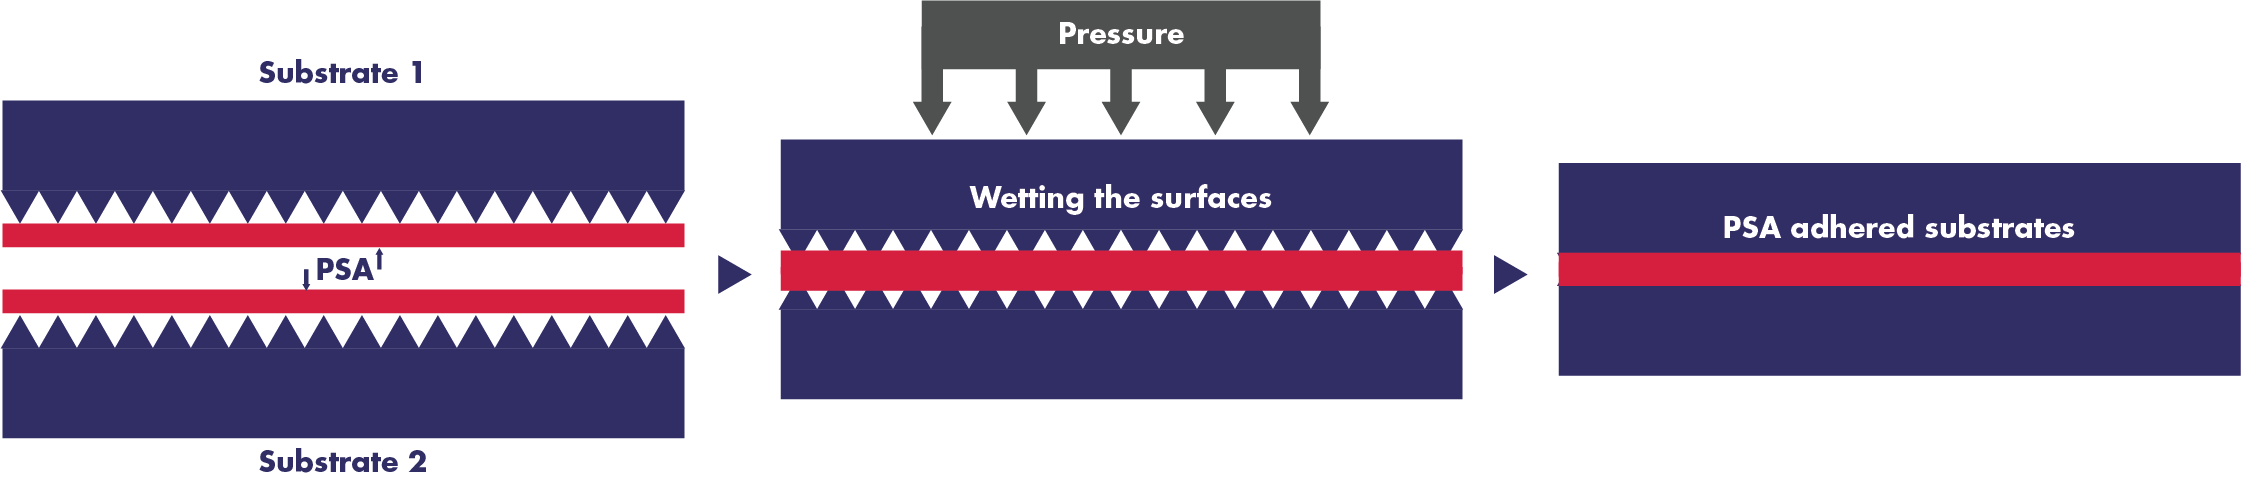 Figure 1. Basic approach to achieving adhesive function through pressure